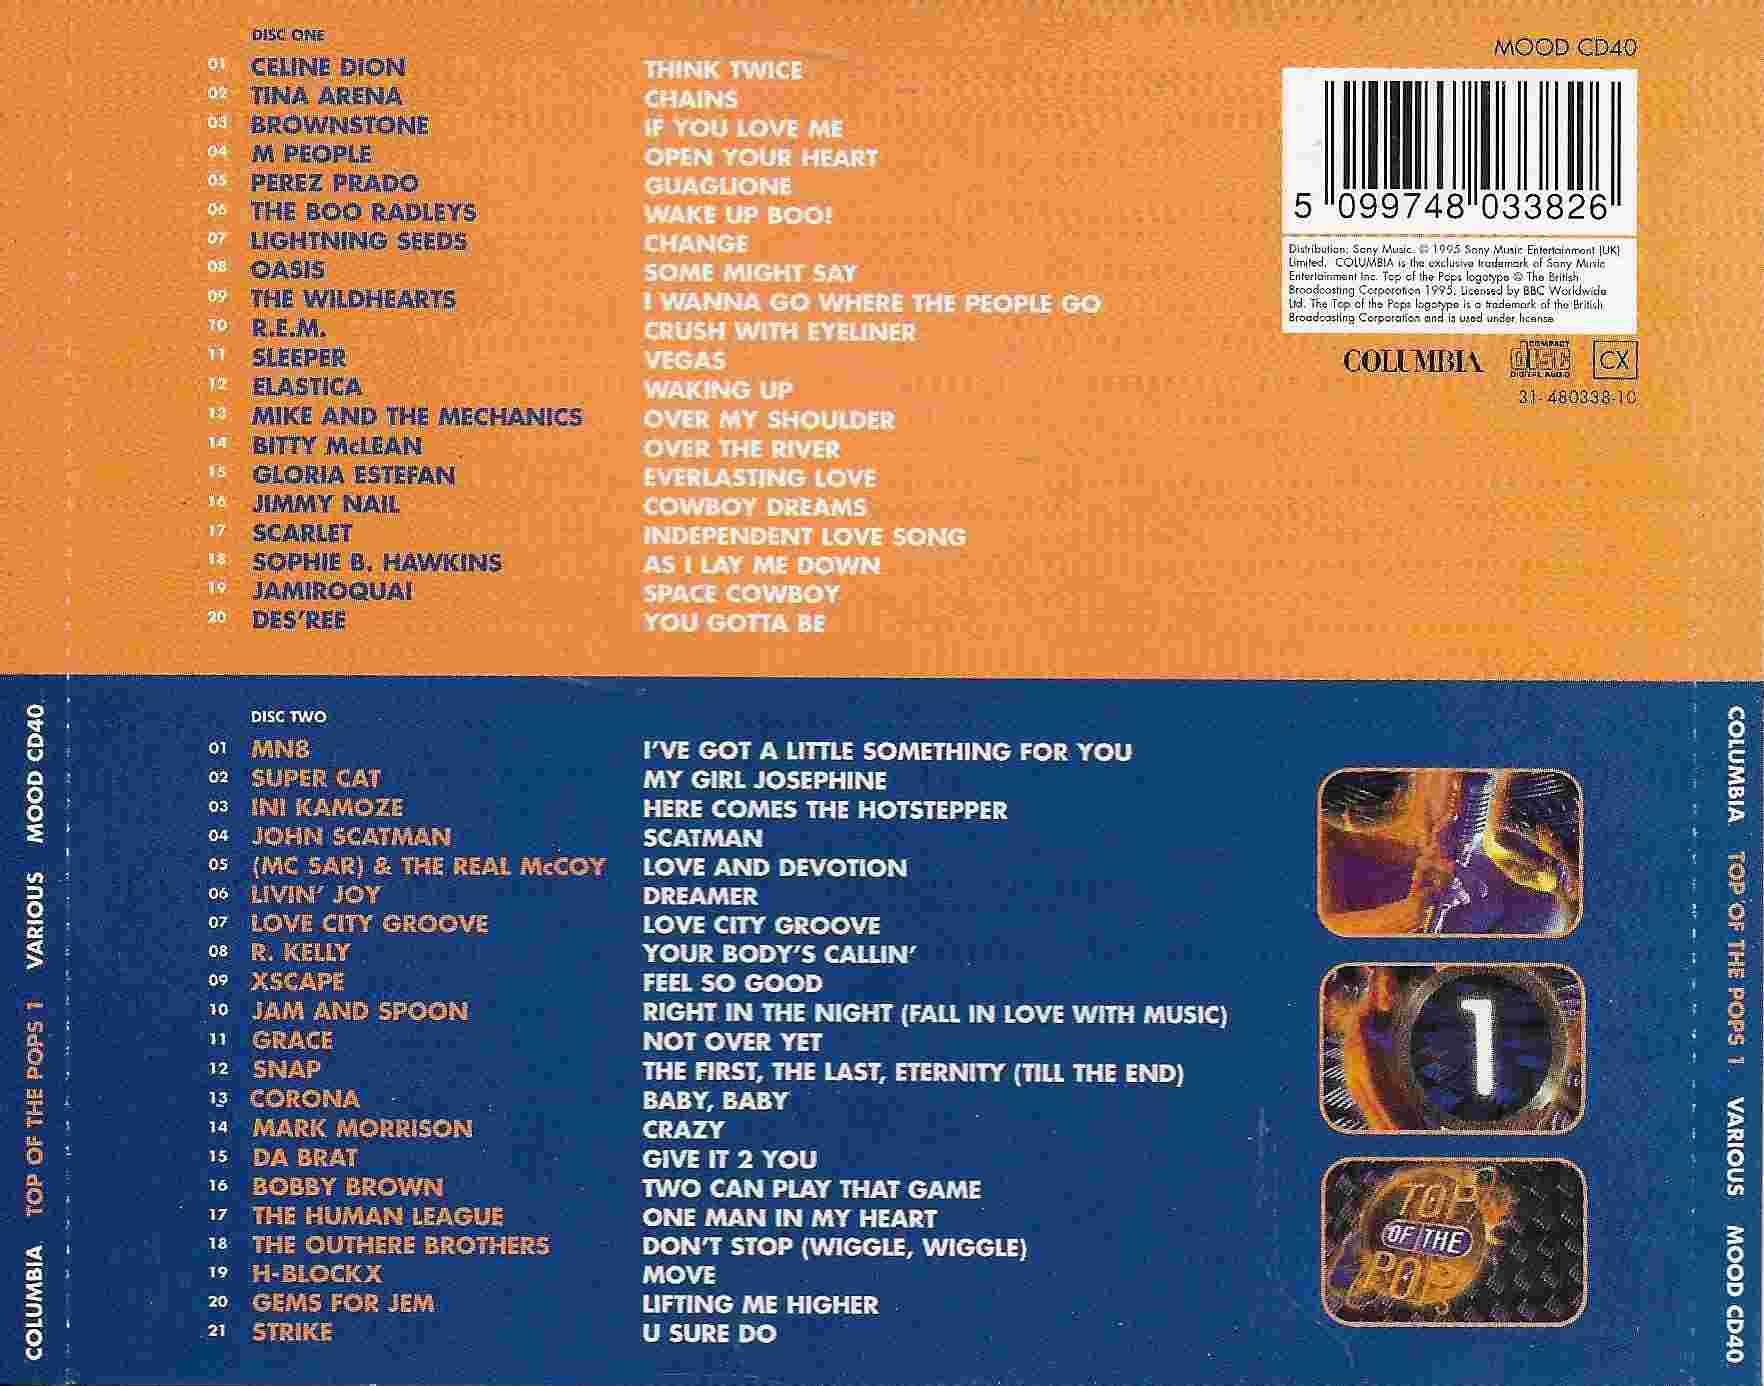 Picture of MOODCD 40 Top of the pops 1 by artist Various 